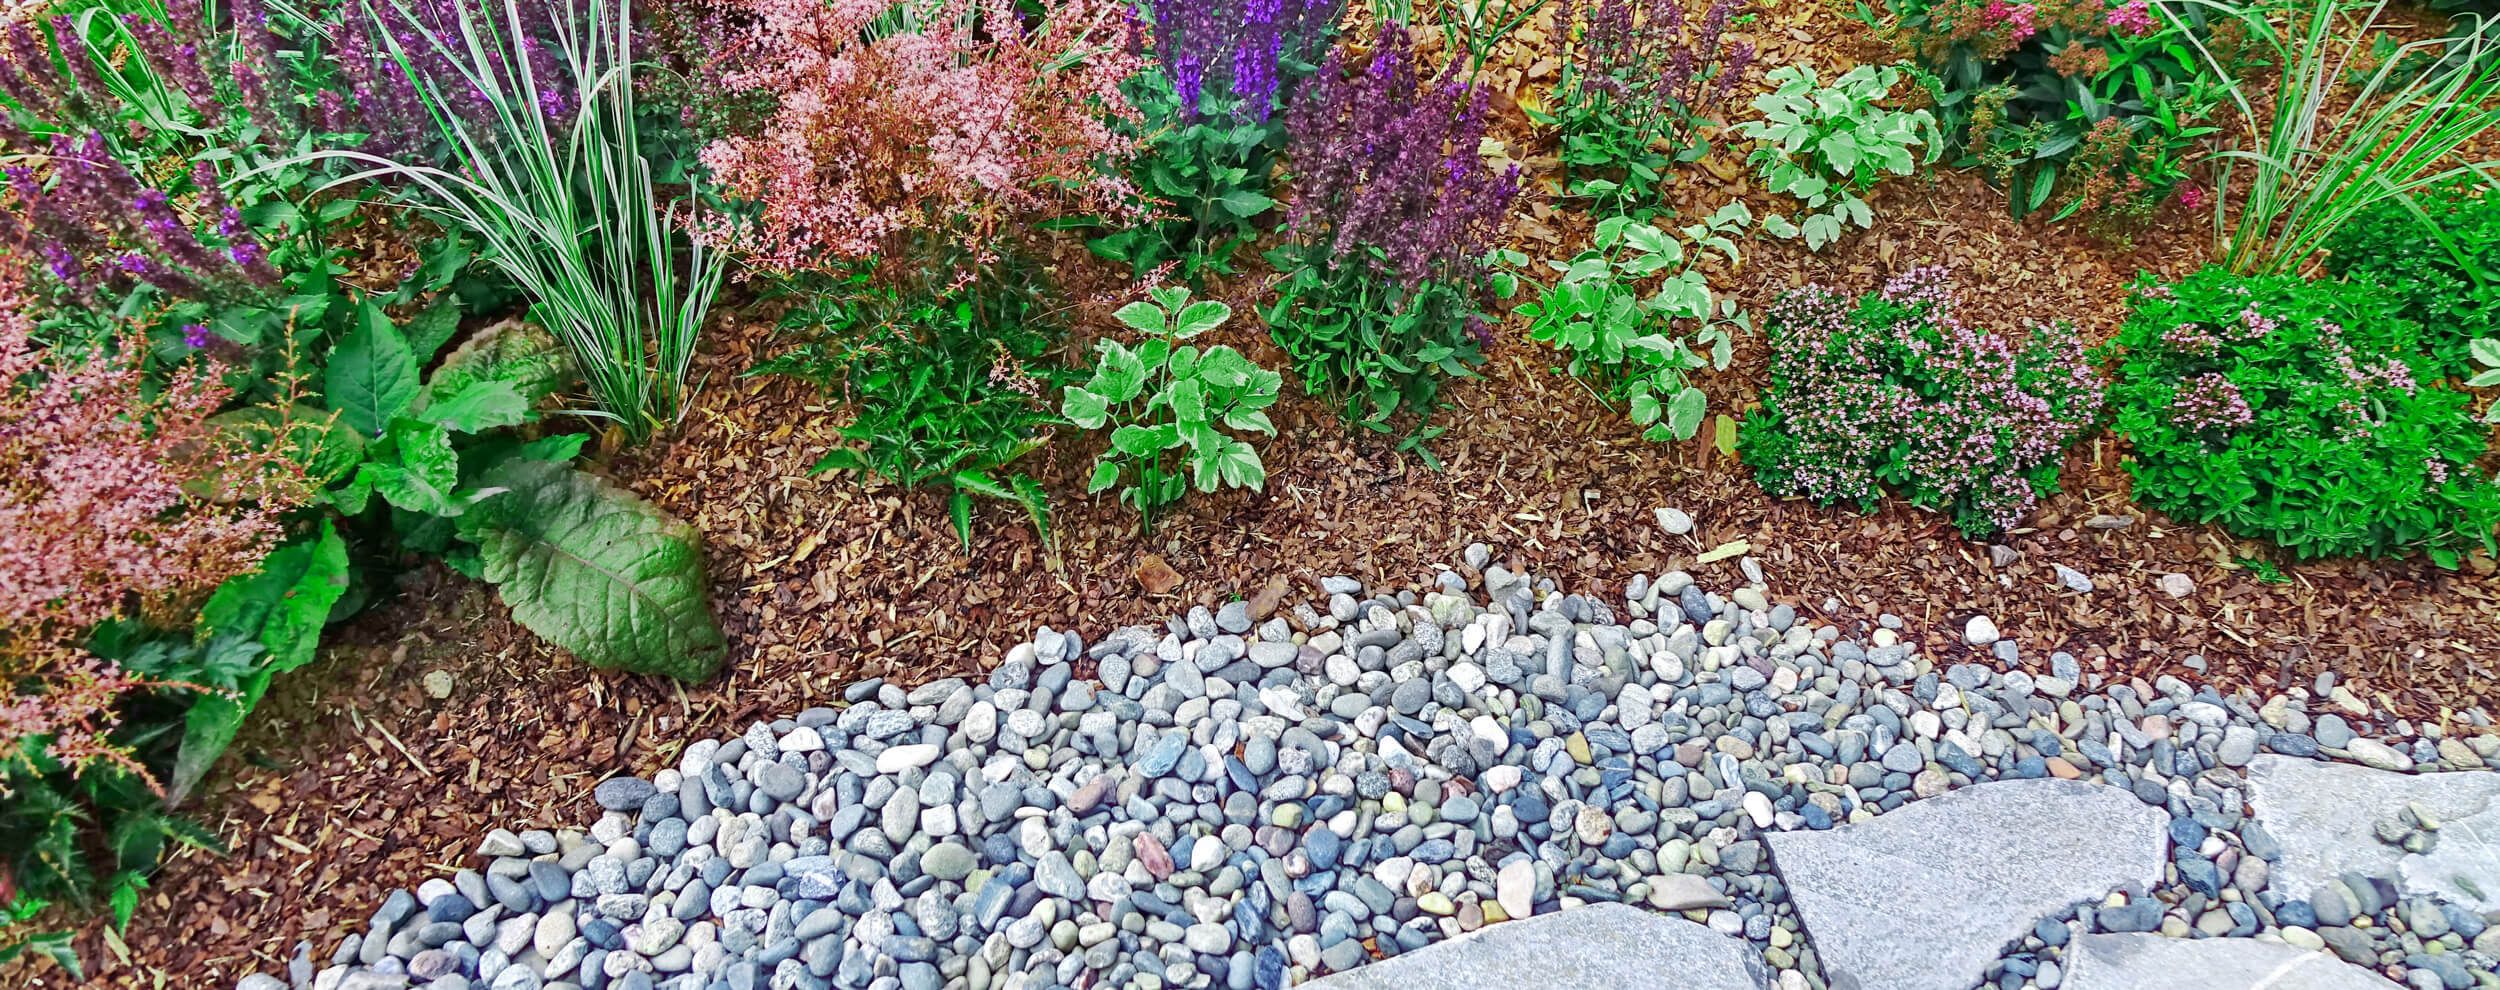 A garden path with stones and small herbs and flowers.